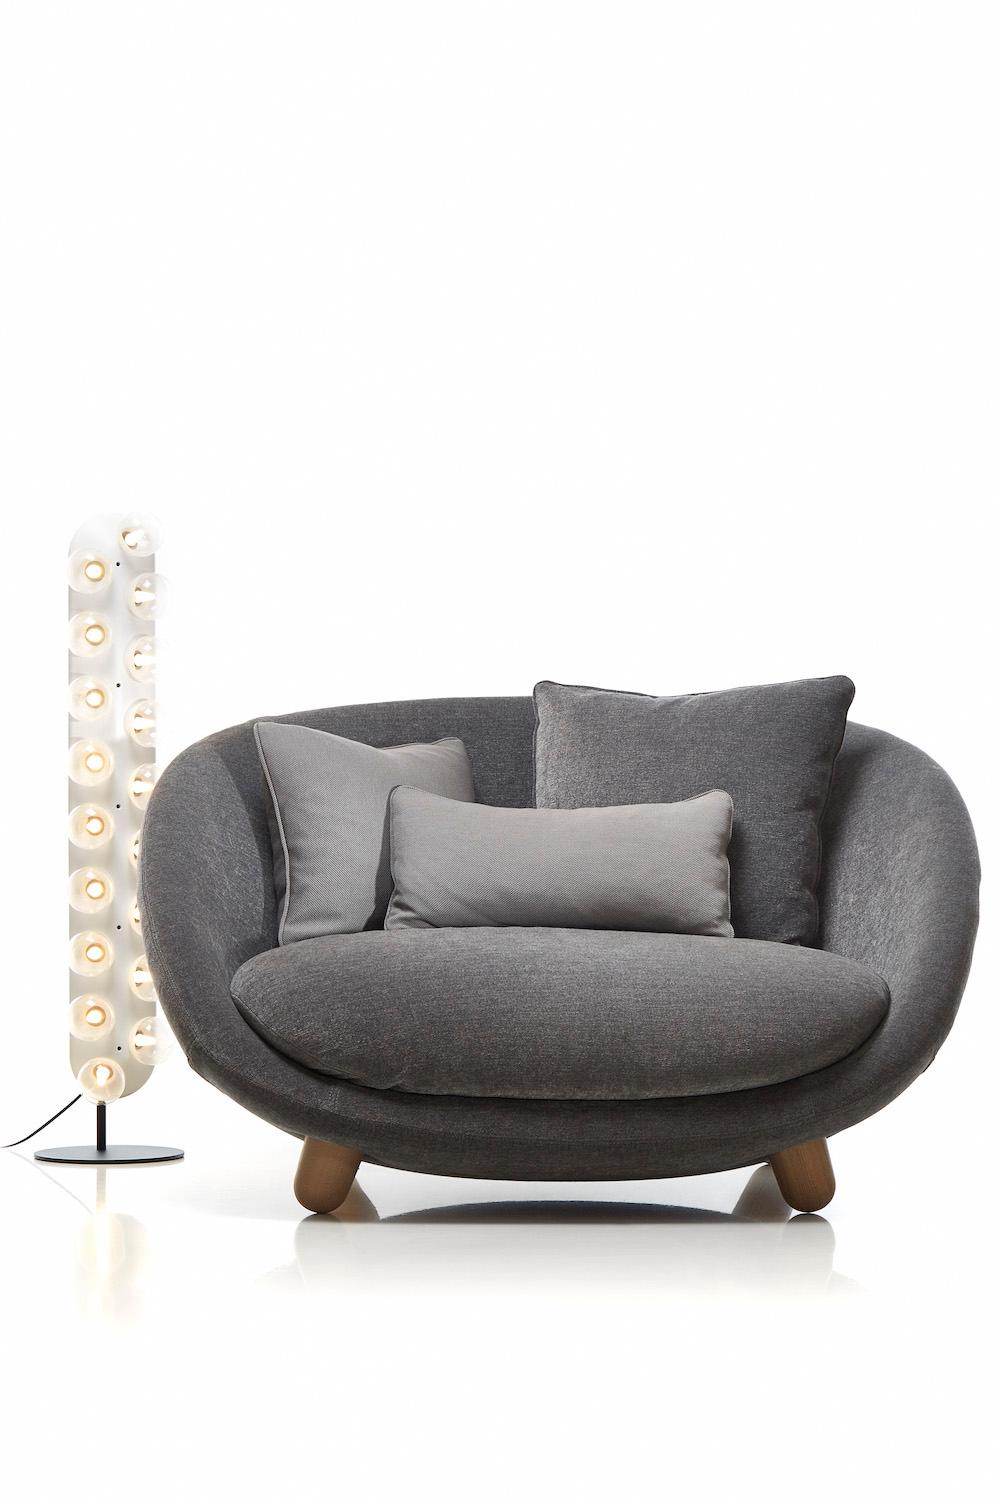 Moooi Love Sofa with Low Back in Fabric or Leather by Marcel Wanders For Sale 9